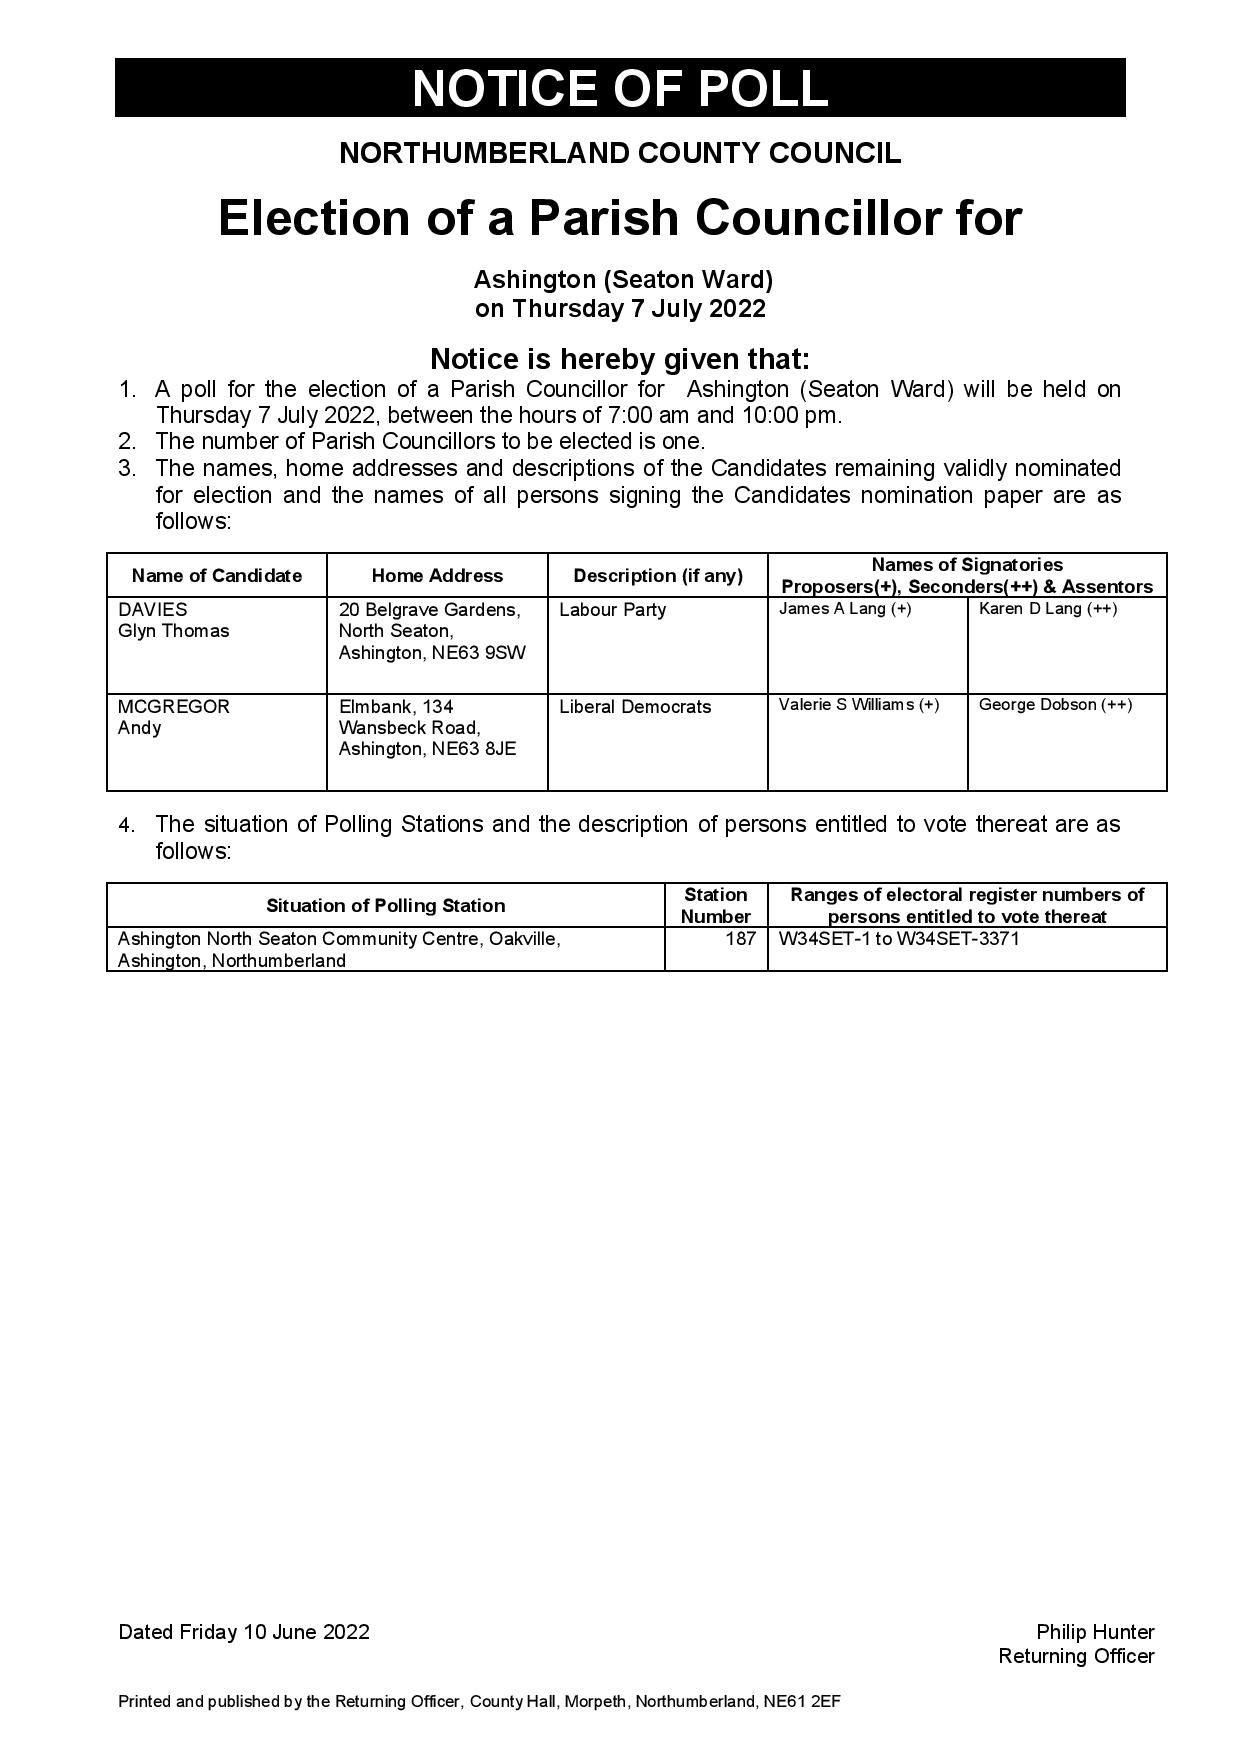 SEATON WARD - Notice of Poll and Statement of Persons Nominated